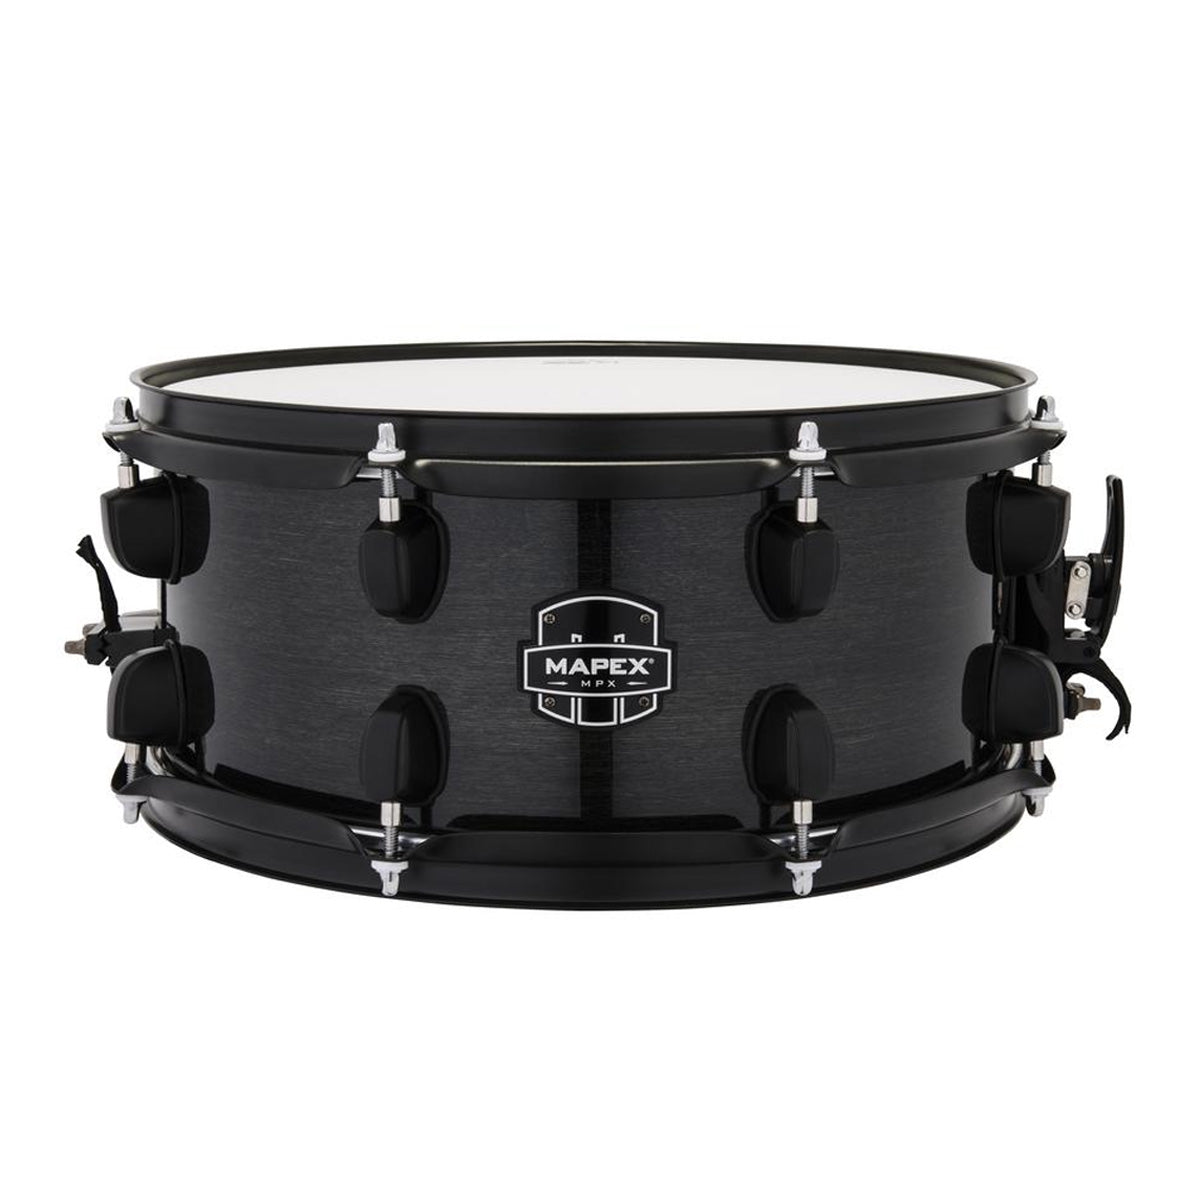 Mapex MPX 13"x6" Hybrid Shell Snare Drum in Black